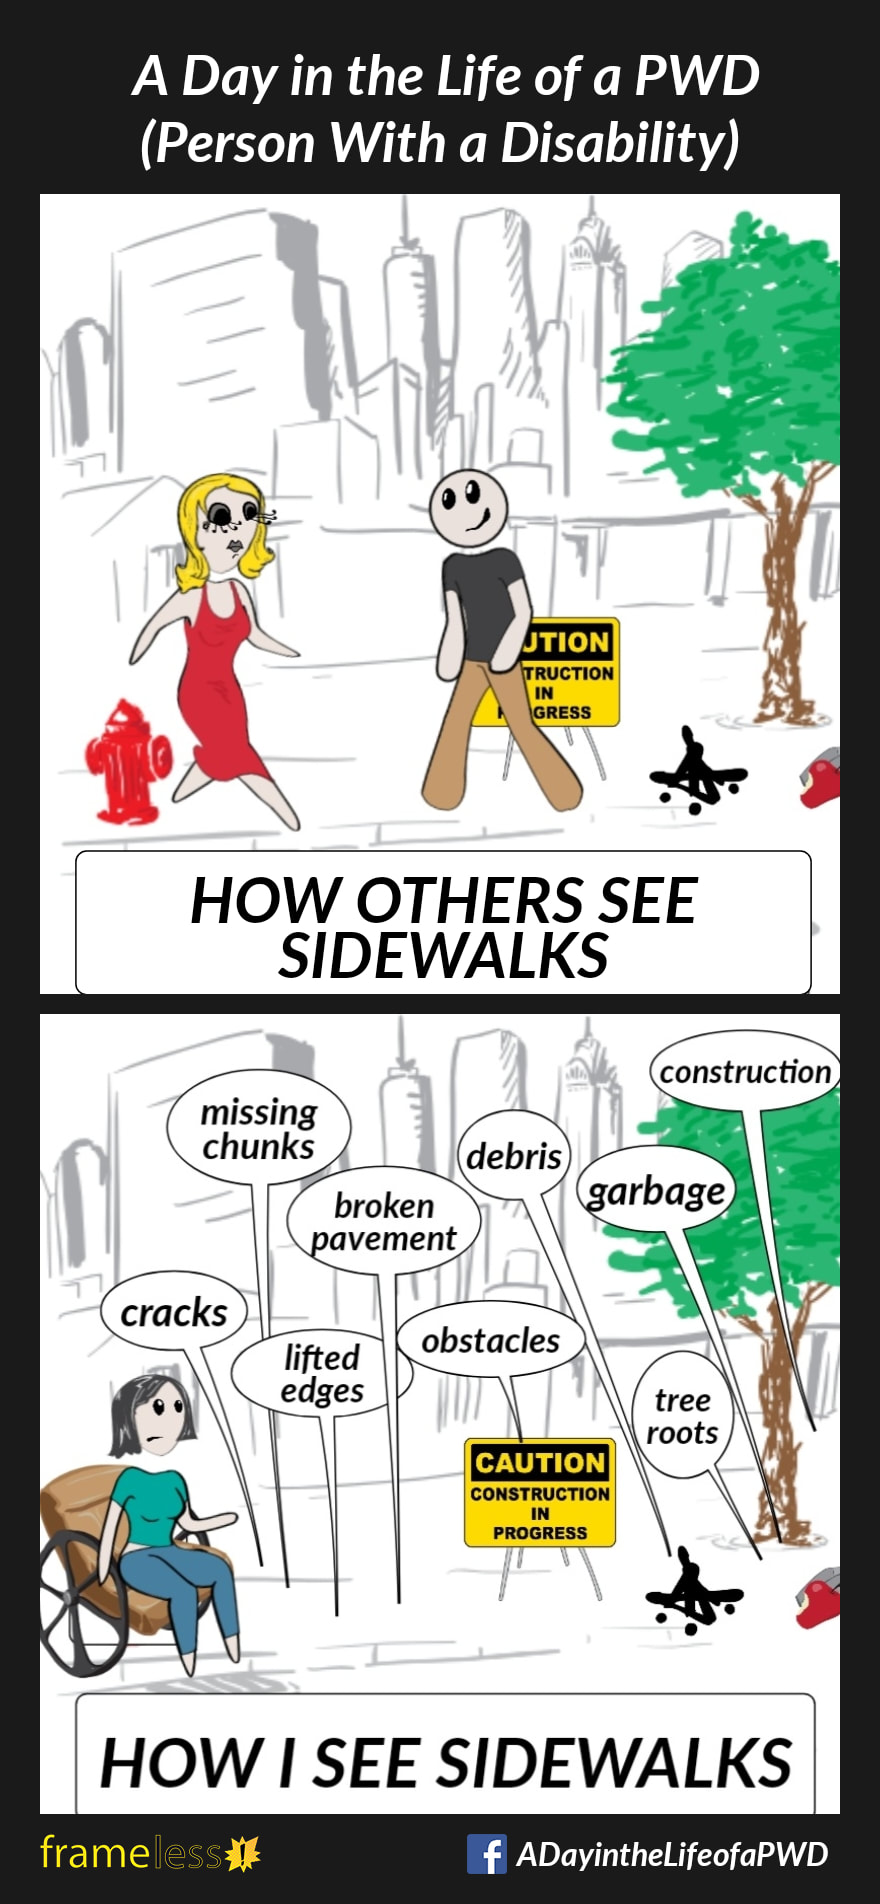 COMIC STRIP 
A Day in the Life of a PWD (Person With a Disability) 

Frame 1:
CAPTION: How Others See Sidewalks 
A typical sidewalk with a construction sign and debris on it. Pedestrians are walking around the obstacles. 

Frame 2:
CAPTION: How I See Sidewalks 
A woman in a wheelchair is looking at the sidewalk. There are arrows pointing to the various issues, listing them:
-cracks
-missing chunks
-lifted edges
-broken pavement
-debris
-obstacles
-tree roots
-garbage
-construction